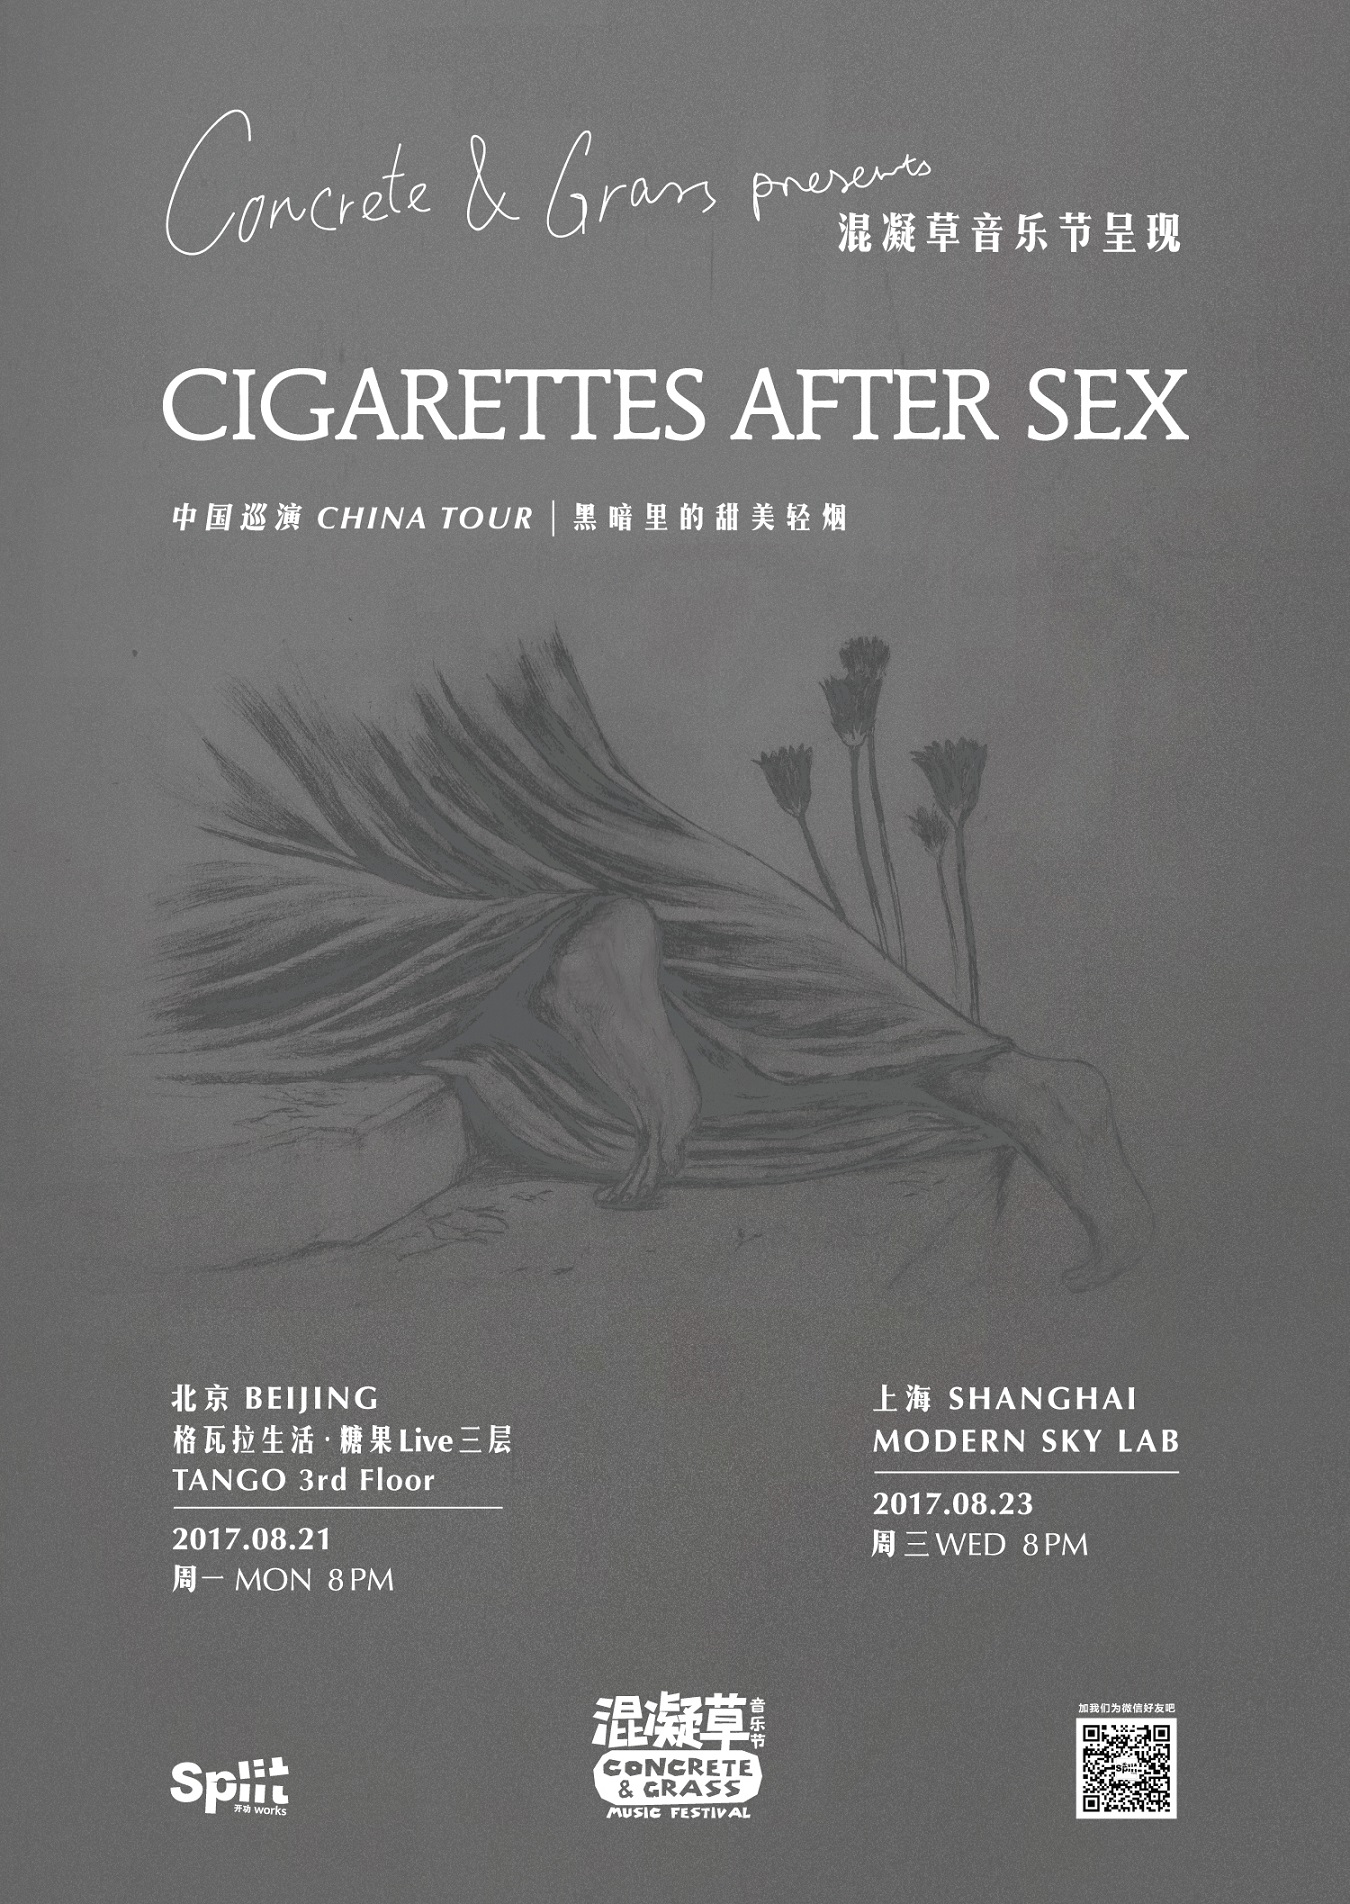 Asians and sex in Shanghai